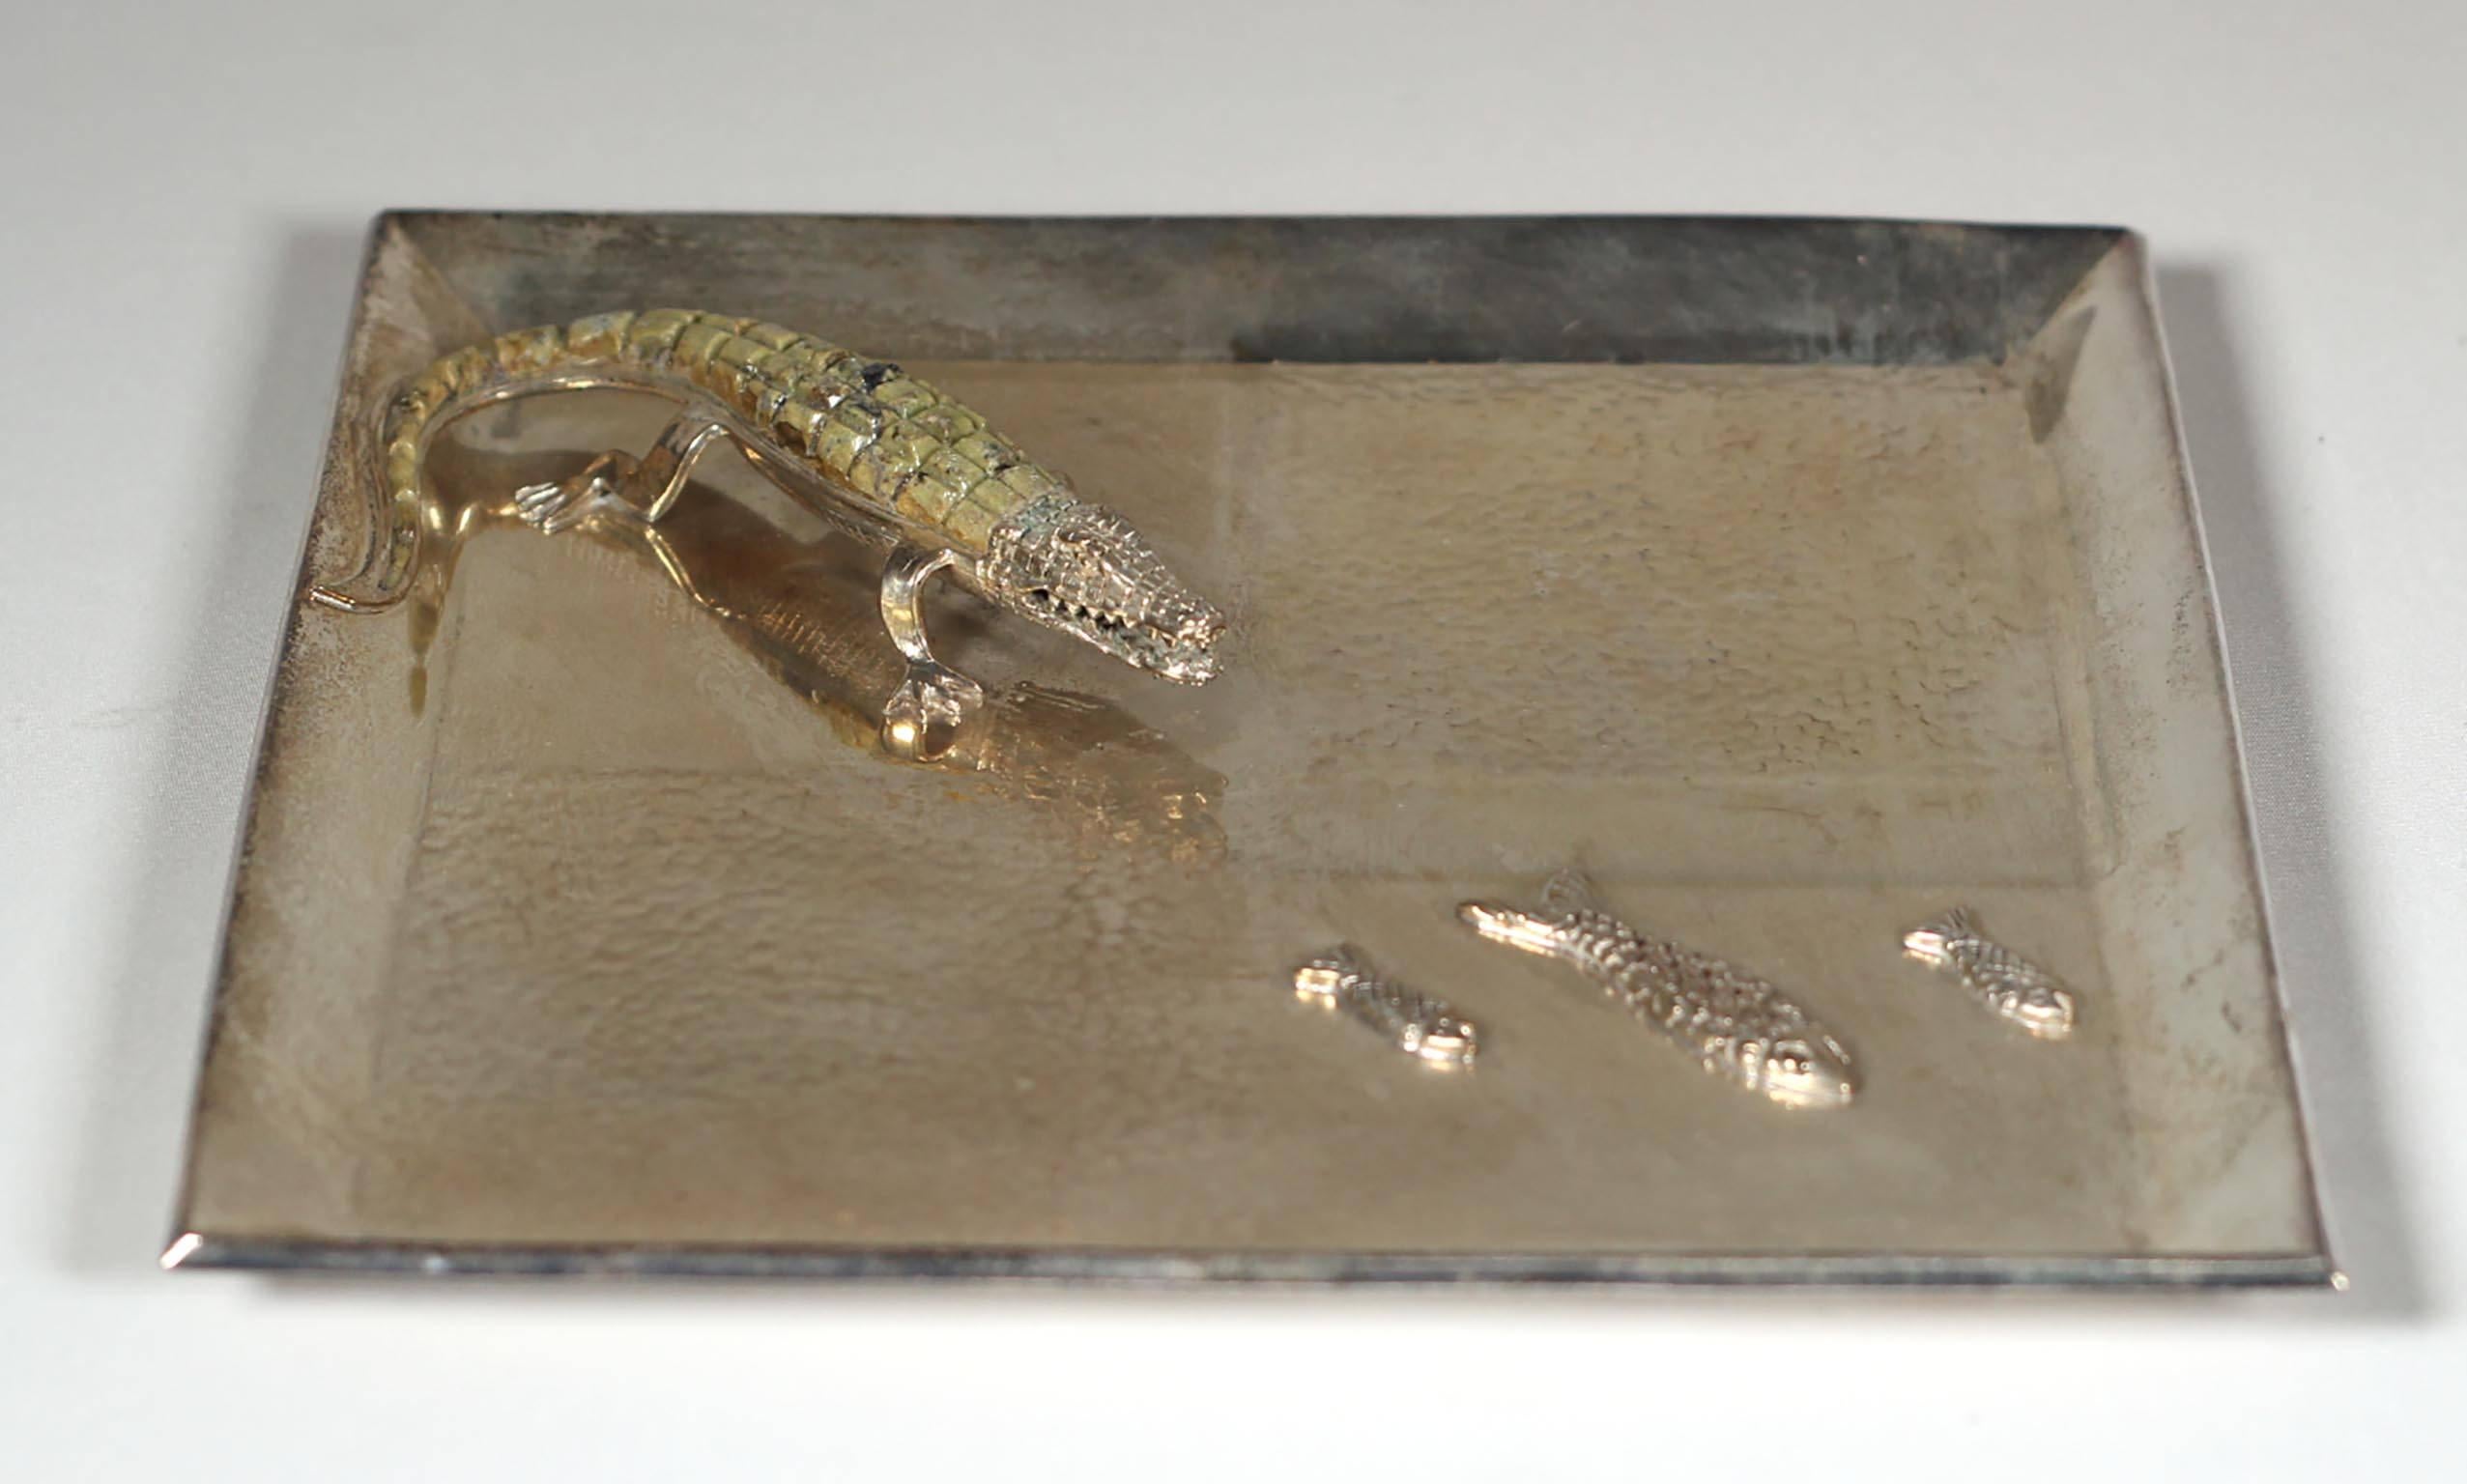 Charming silver plated tray featuring an alligator pursuing three fish. The alligator's back and tail are covered with a lovely verdigris green stone possibly Malachite.